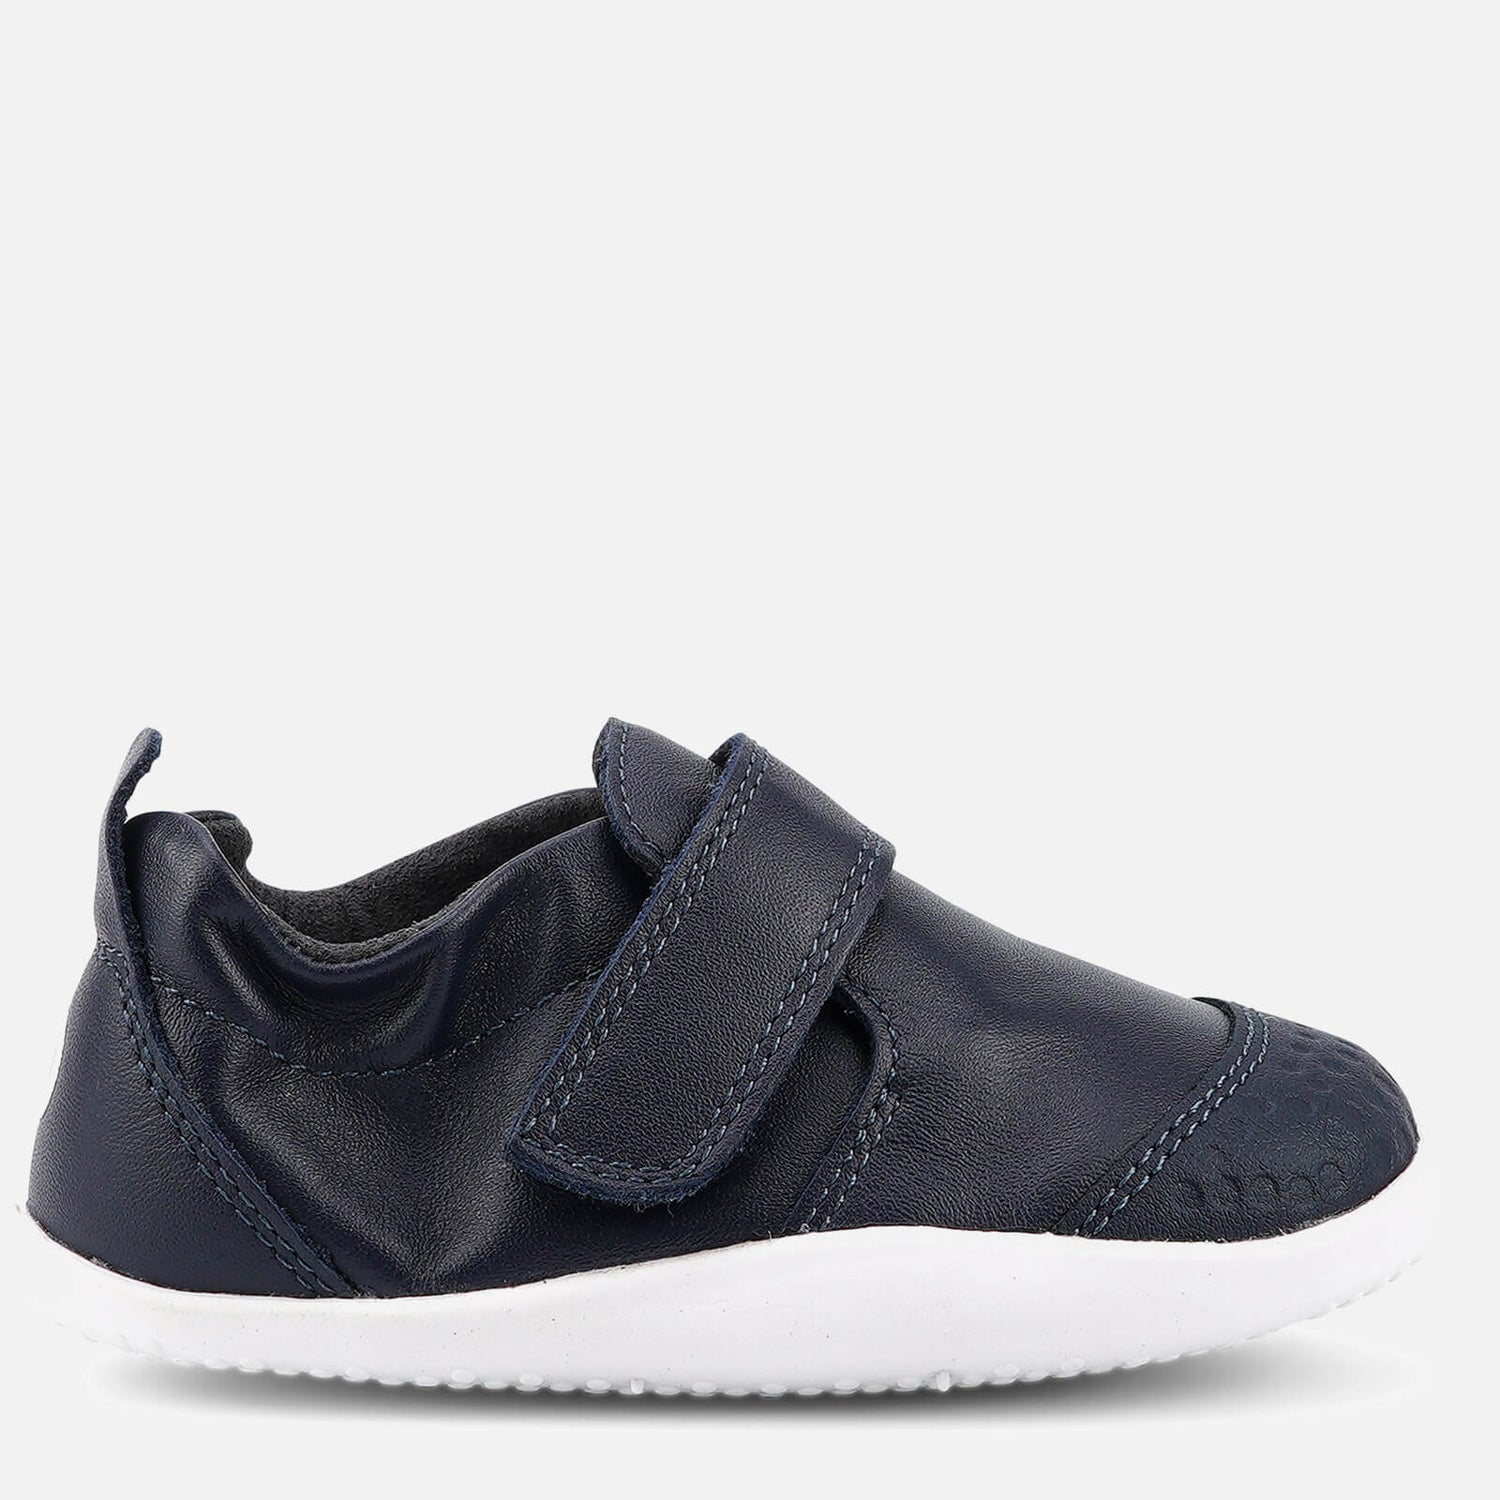 Bobux Boys' GO Leather First Walkers - Navy - UK 2 Baby